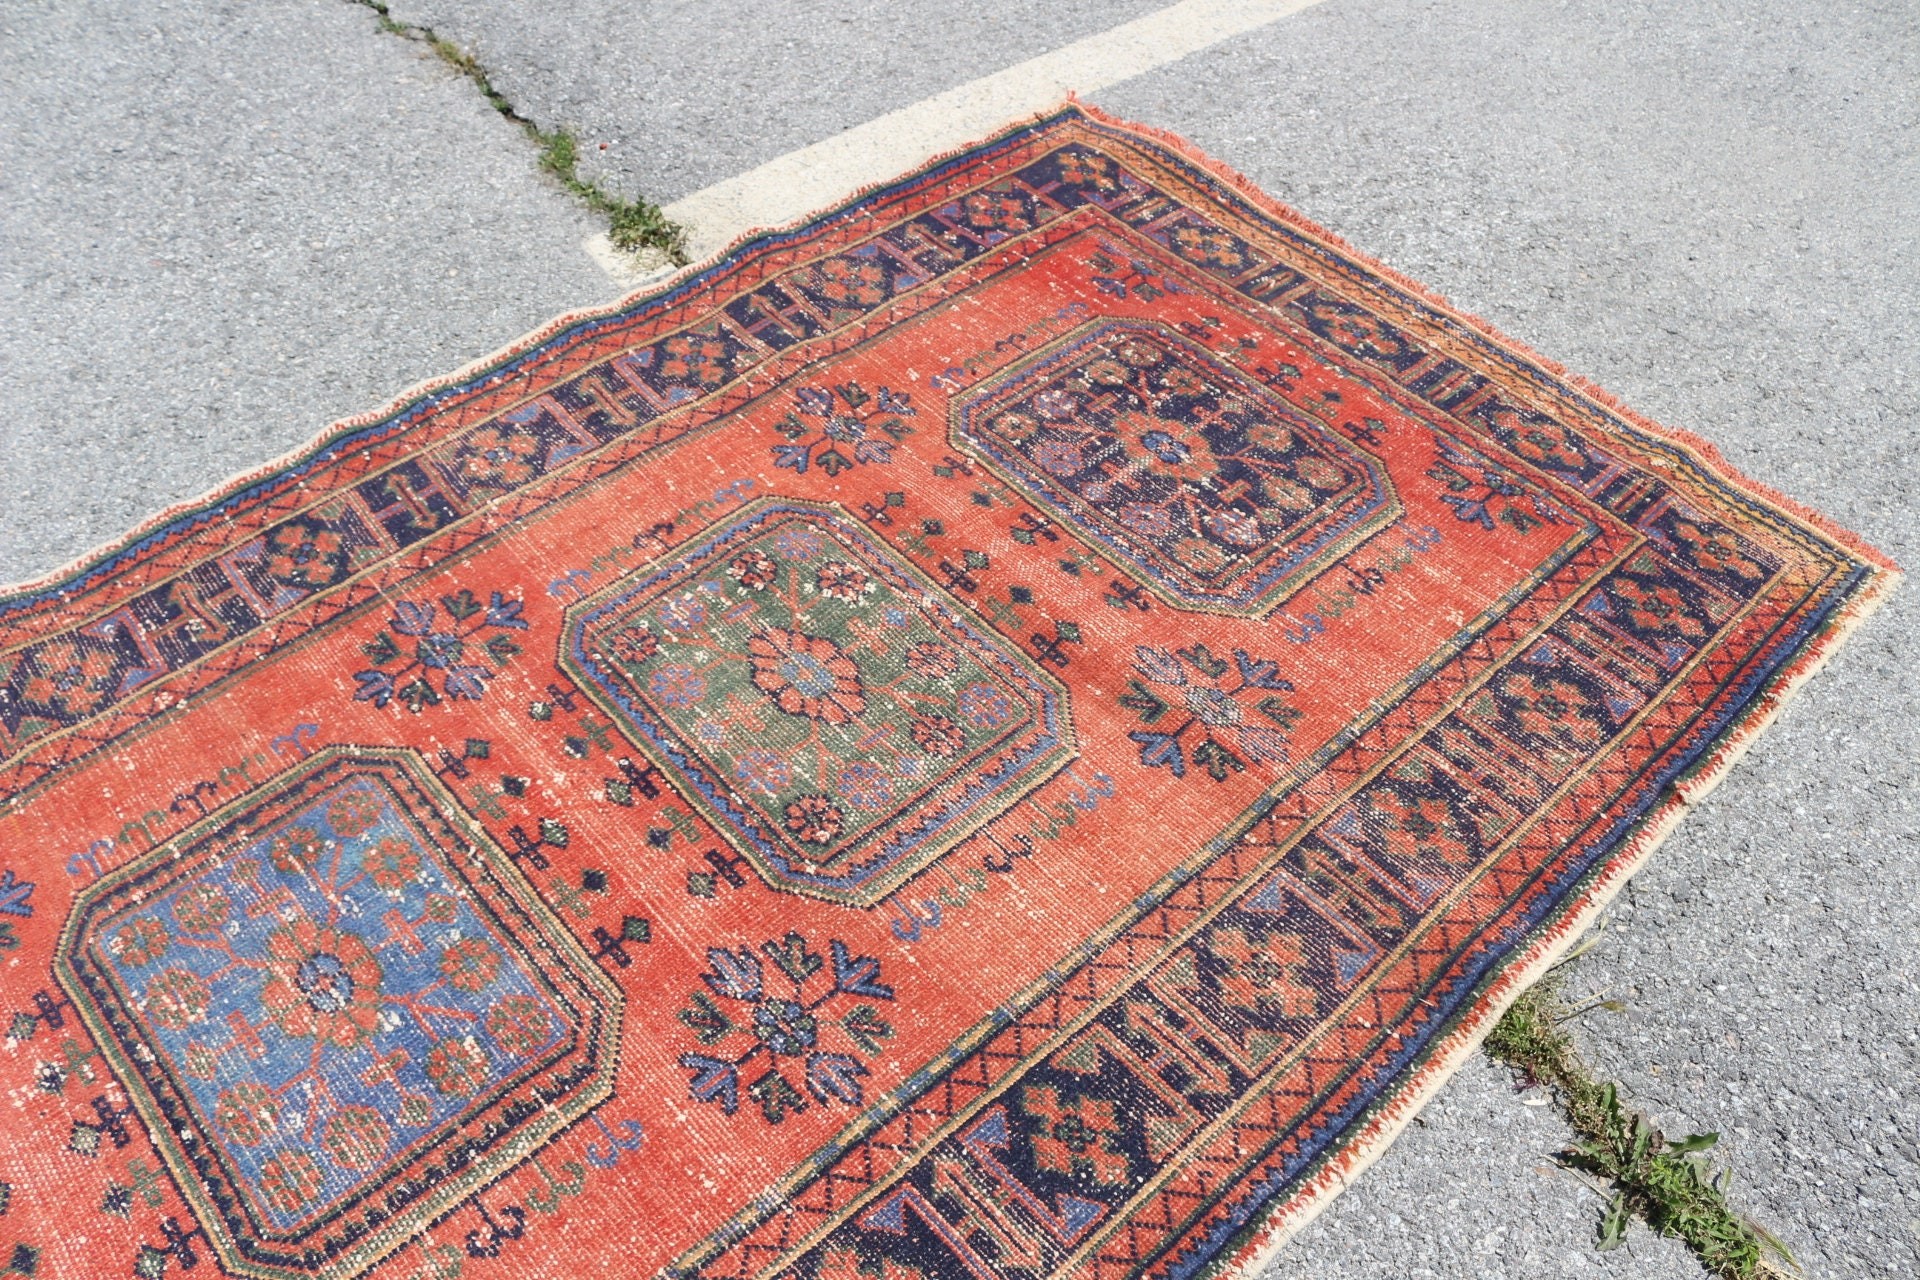 Turkish Rugs, Red Kitchen Rugs, Living Room Rugs, 4.8x11.2 ft Large Rug, Home Decor Rug, Vintage Rug, Antique Rugs, Dining Room Rugs